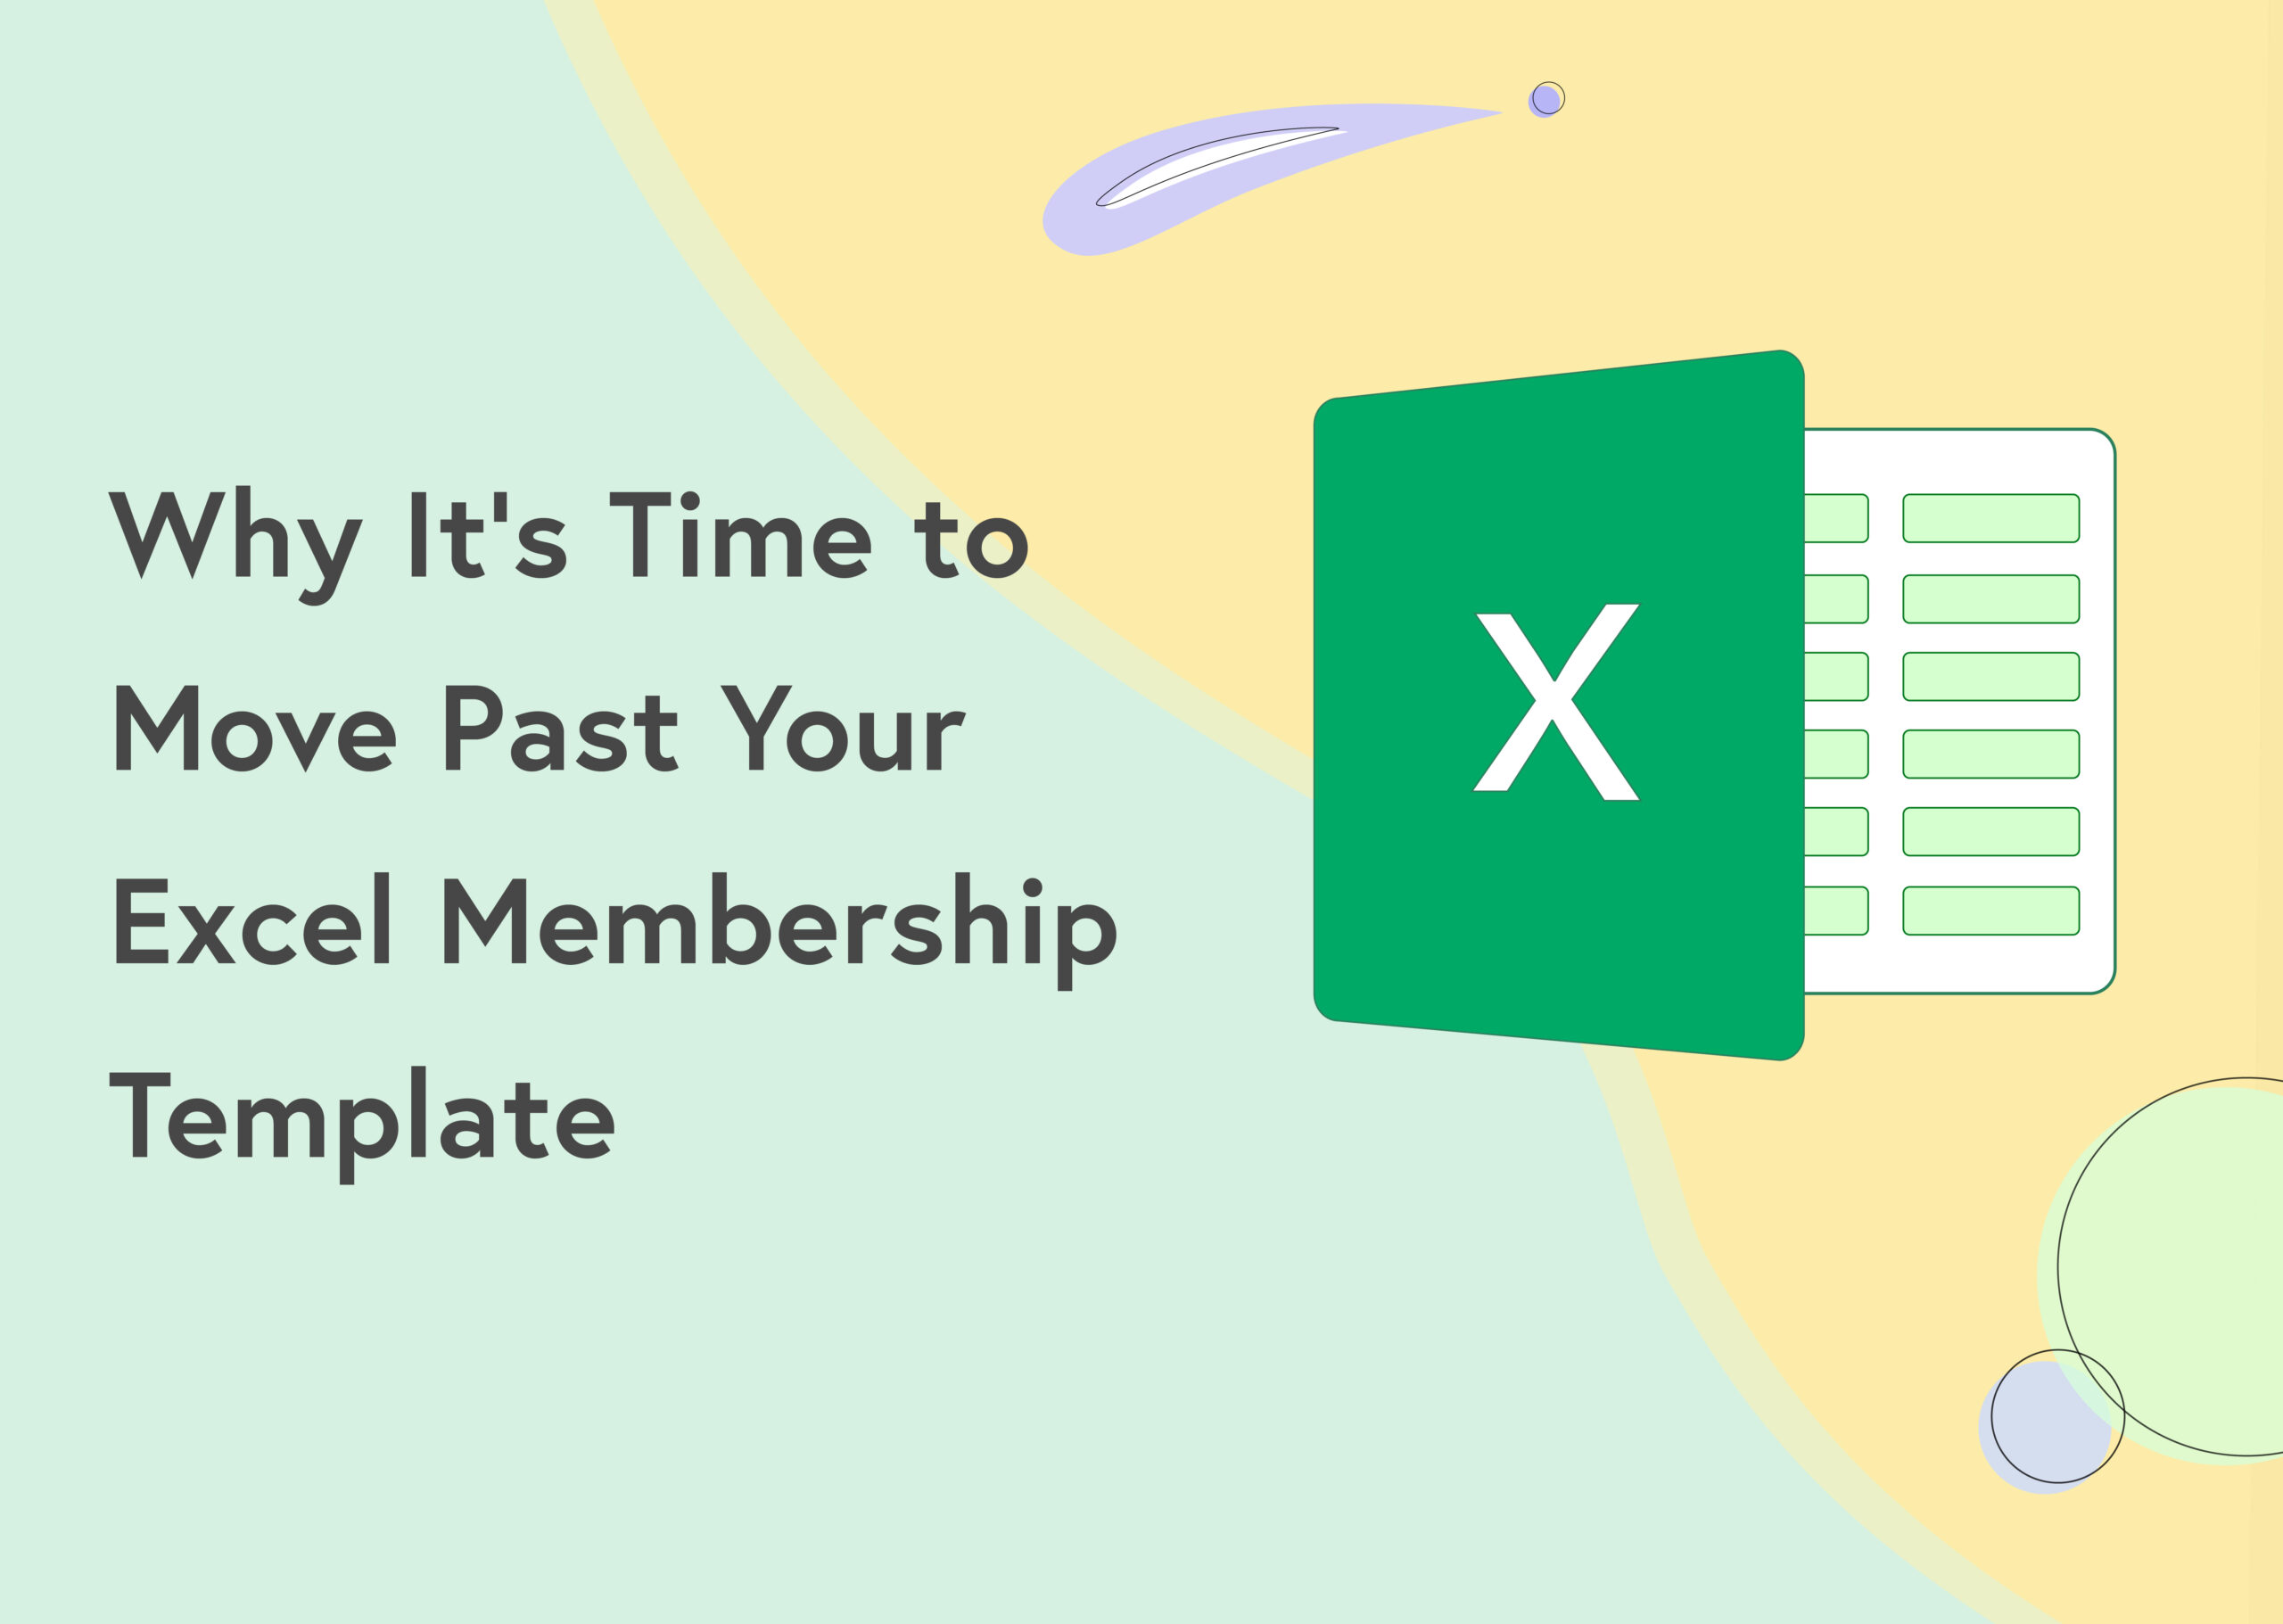 Why It's Time to Move Past Your Excel Membership Template